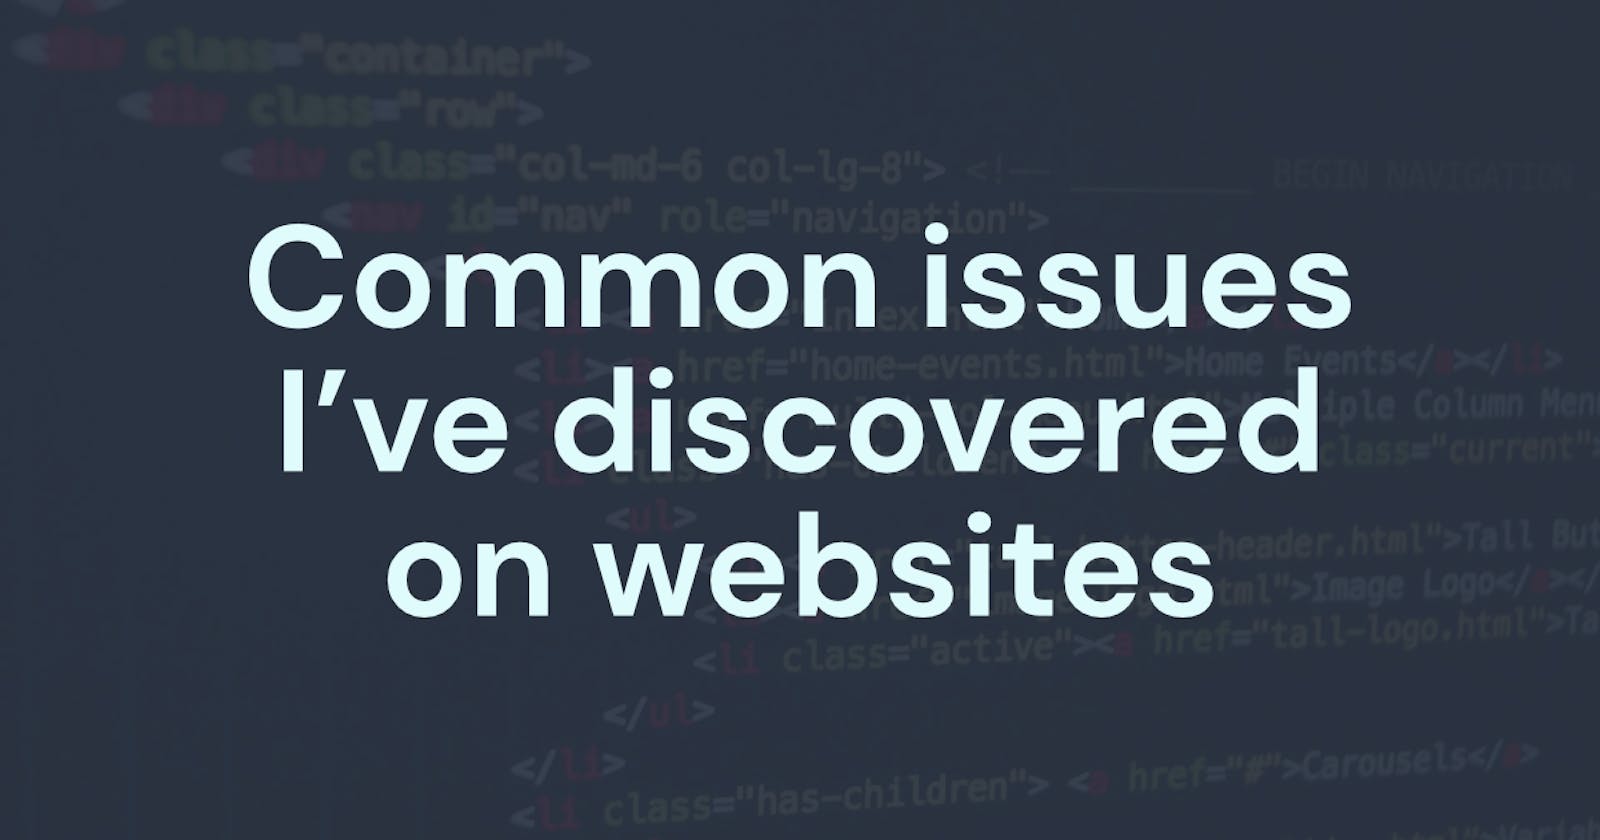 Common issues I've discovered on websites